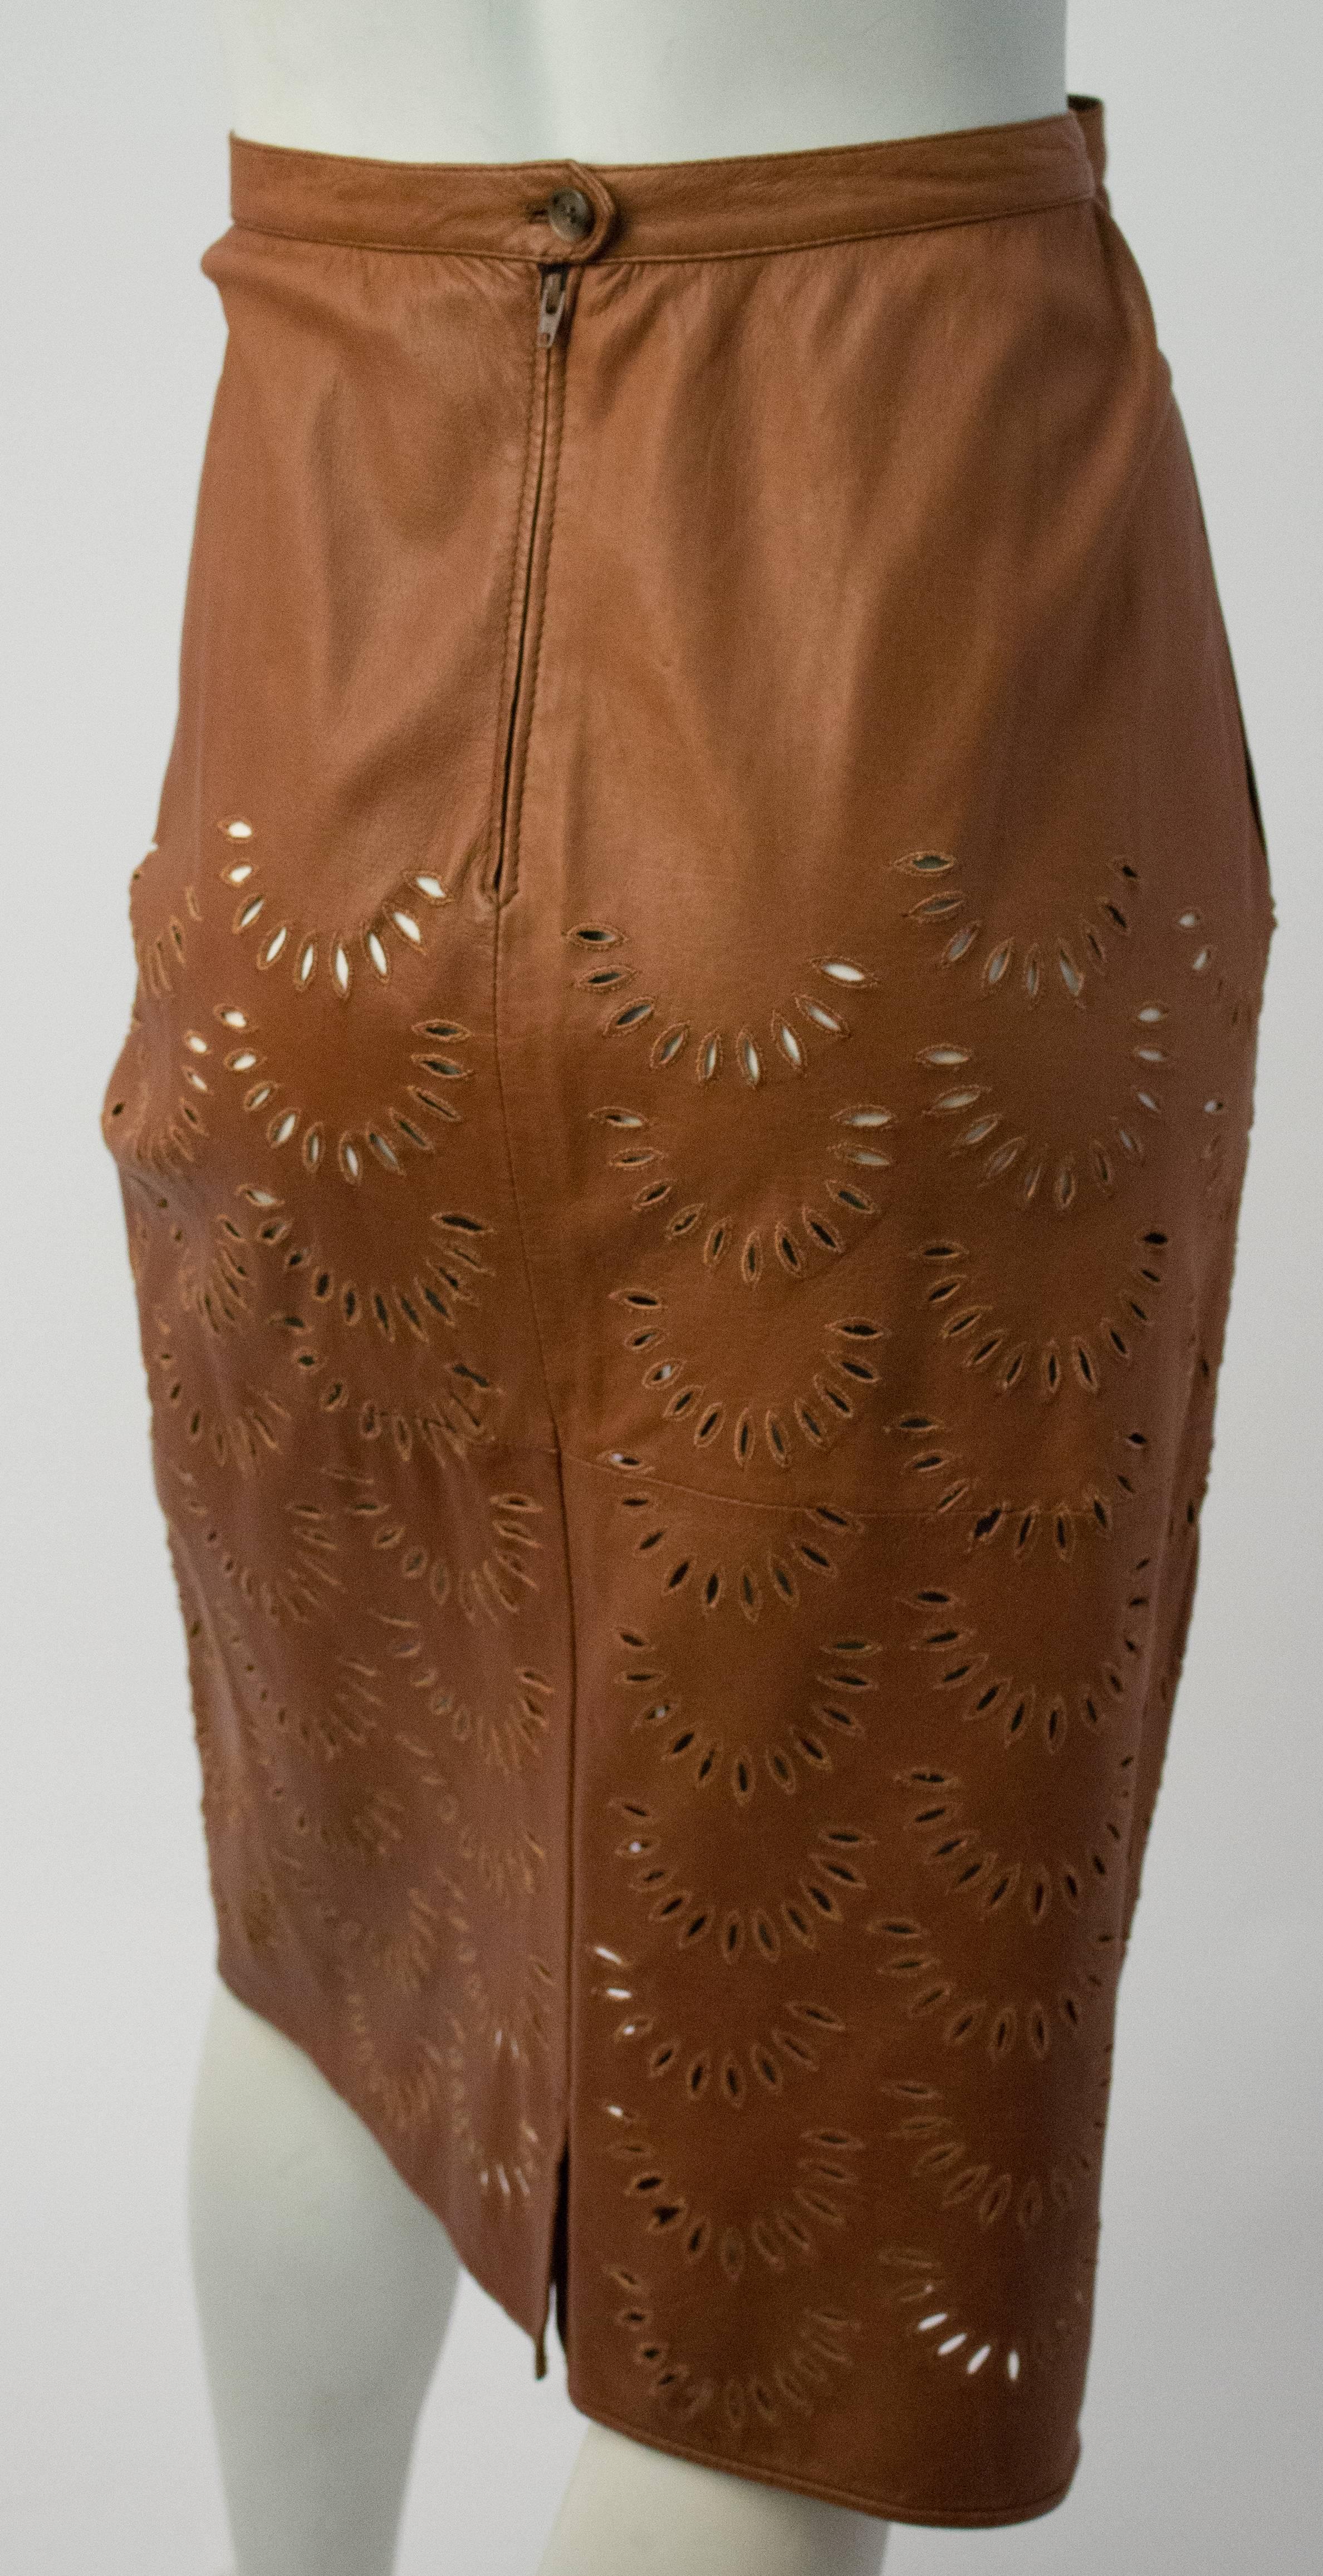 Valentino Calfskin Leather Skirt w/ Cut Work Detail. Two side pockets. Unlined, cotton faced waistband. Back seam zipper and button closure. Petal-shaped cutouts reinforced with stitching. Size EU 48. Made in Italy.